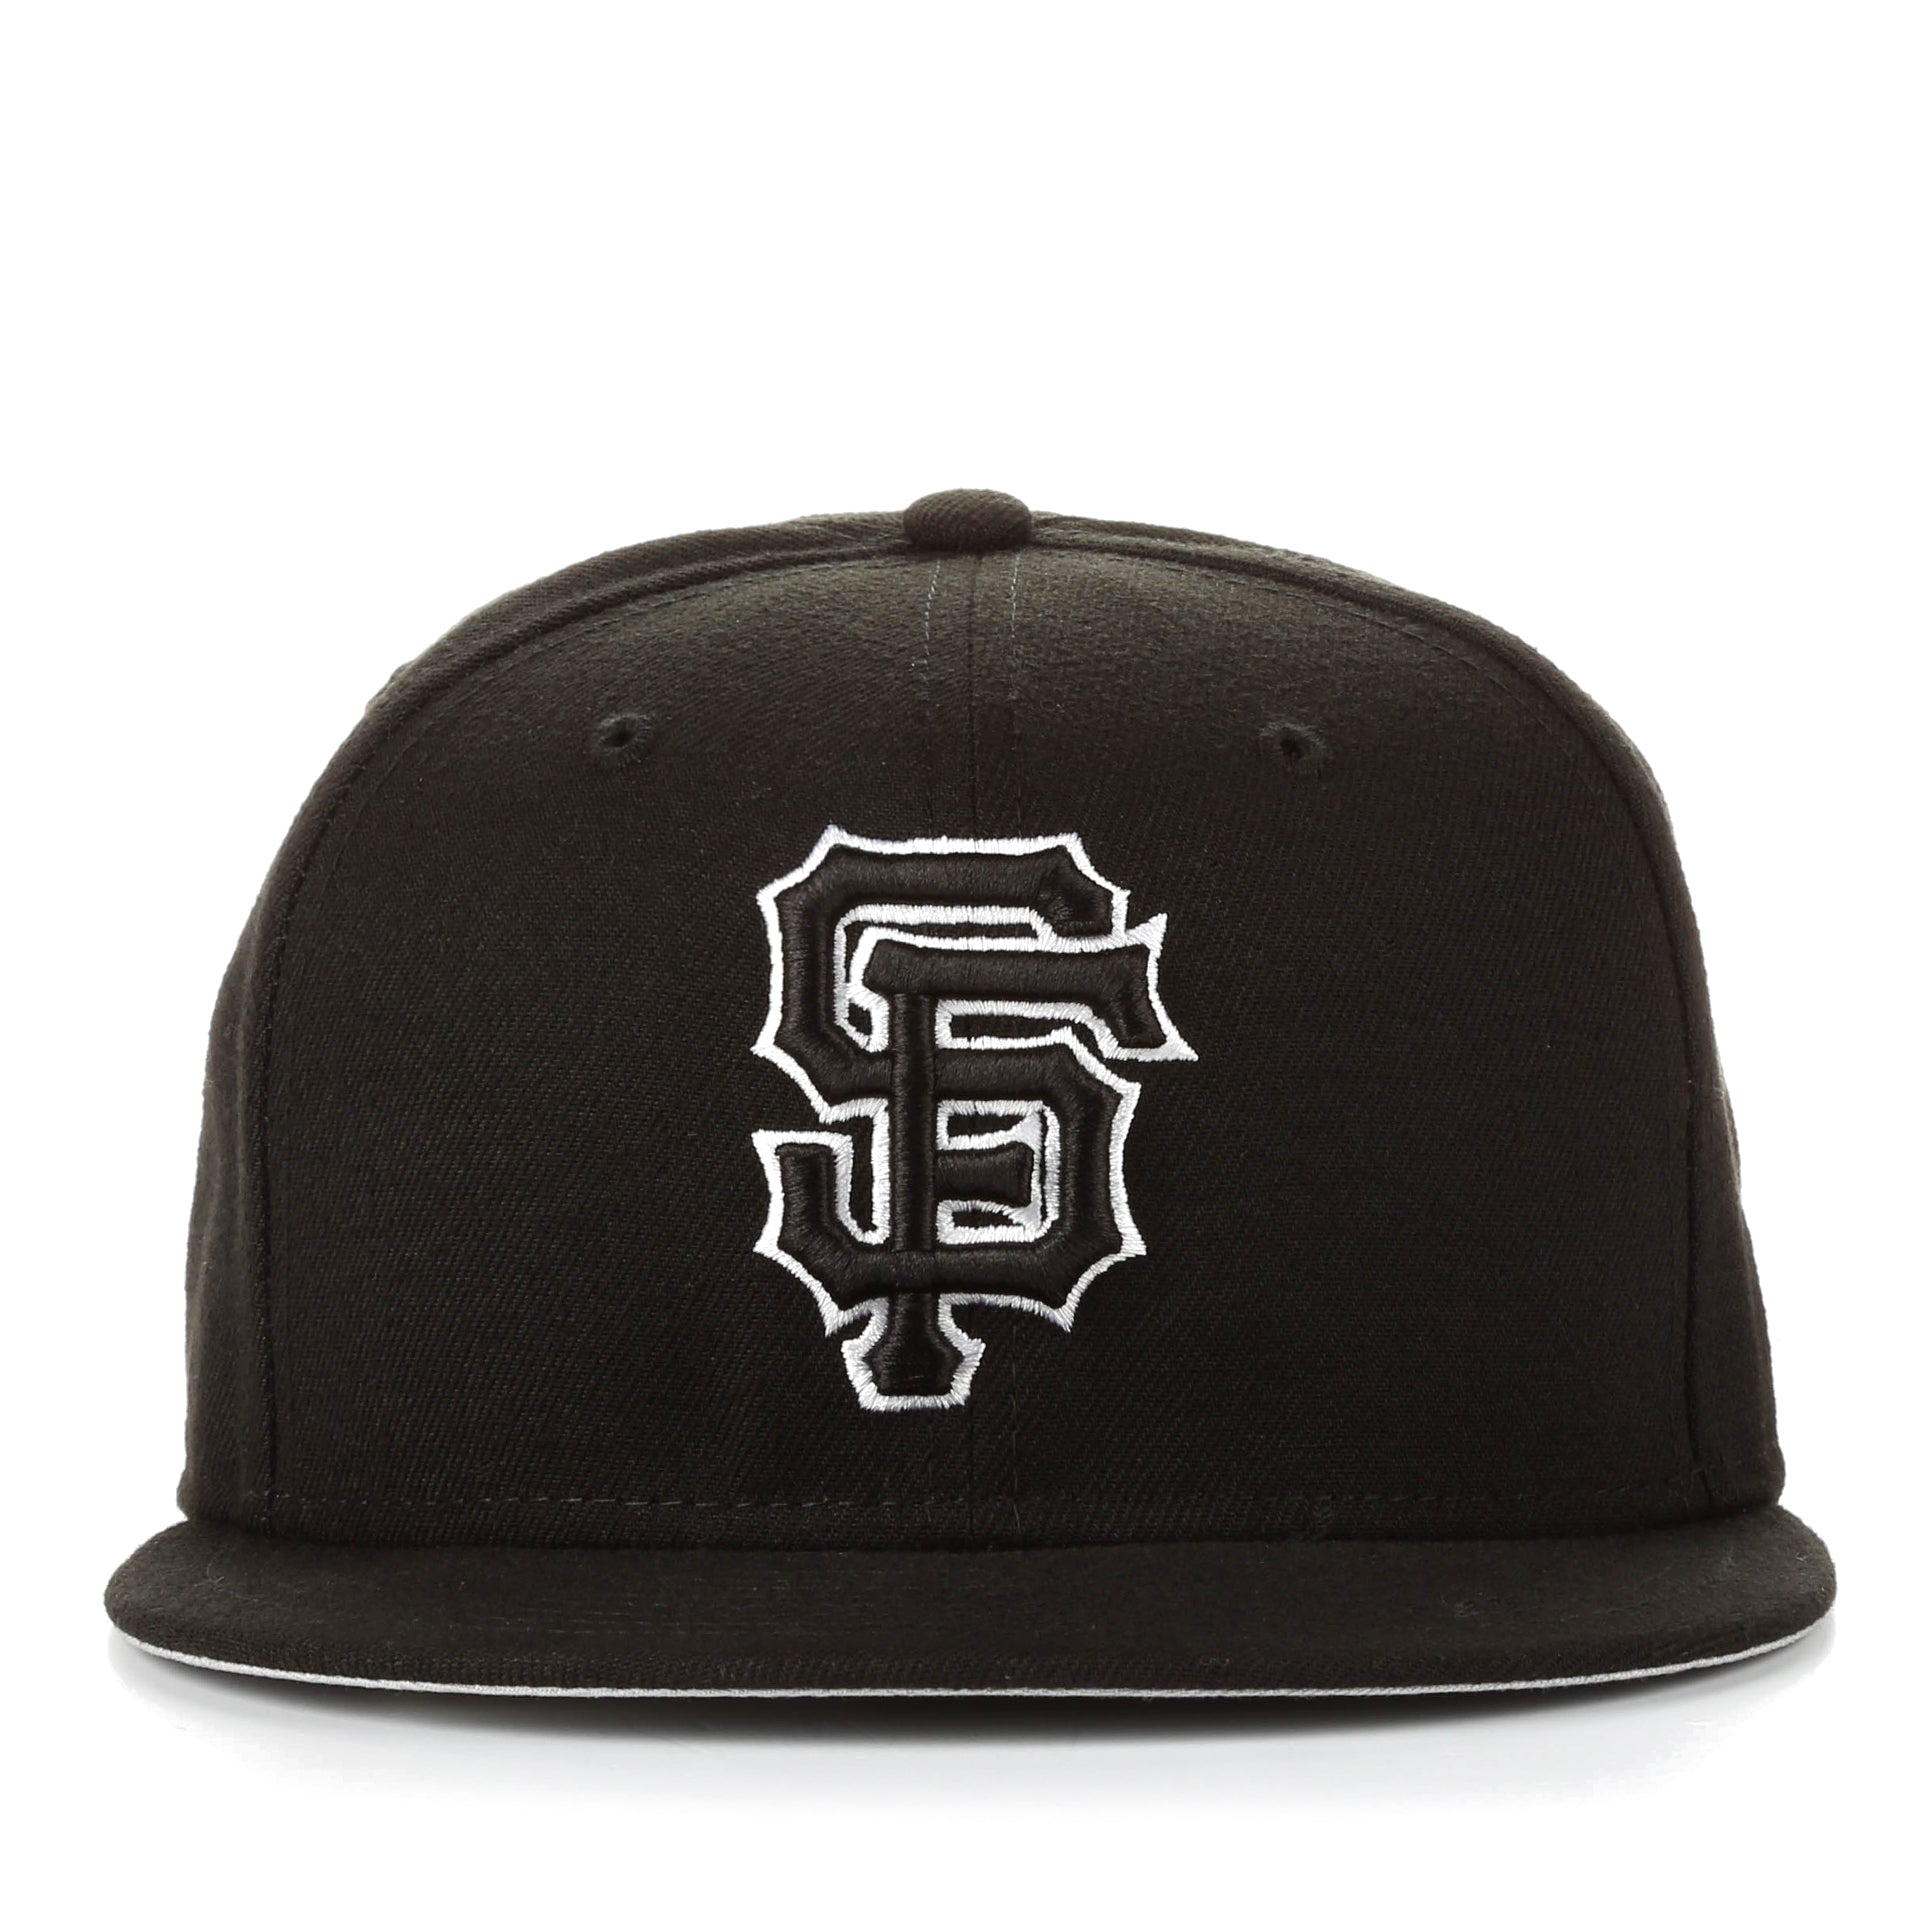 New Era 59Fifty AC Performance Fitted Cap - San Francisco Giants/Black -  New Star